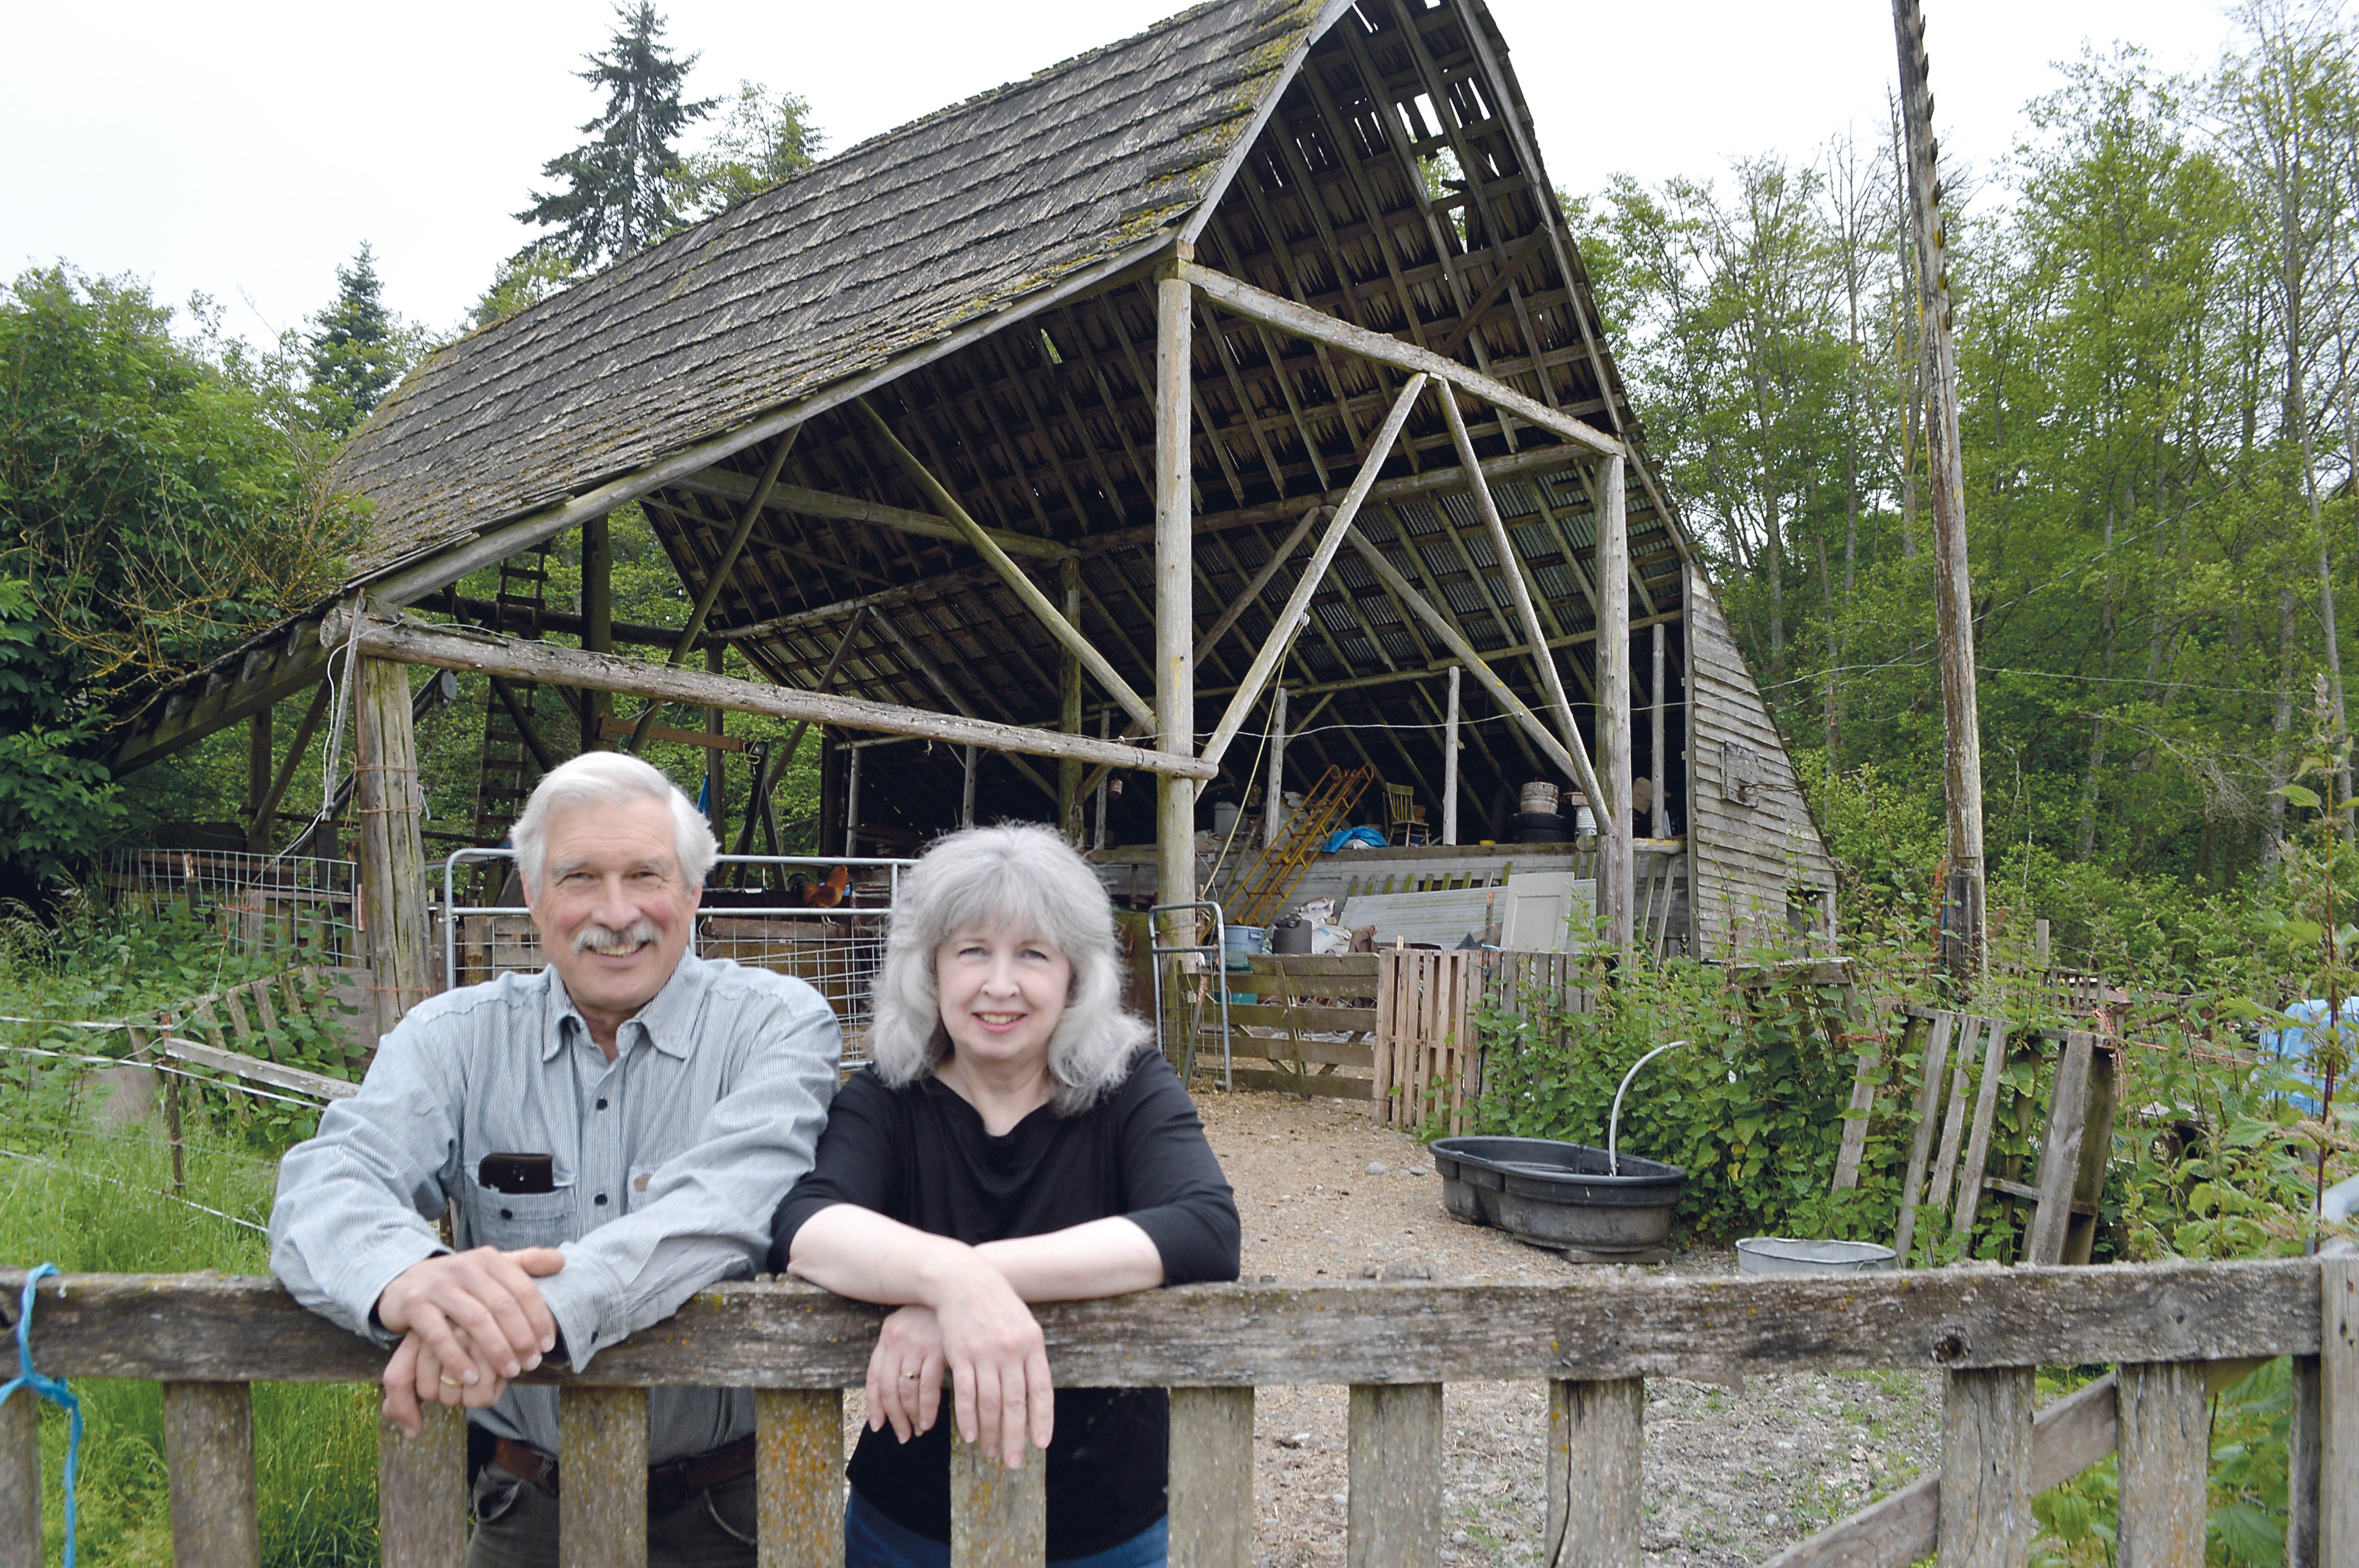 Paul and Deb Hansen will host a dance Friday to raise funds to help preserve their barn off Frost Road south of Carlsborg. The dance will be at the Sequim Prairie Grange Hall. — Joe Smillie/Peninsula Daily News